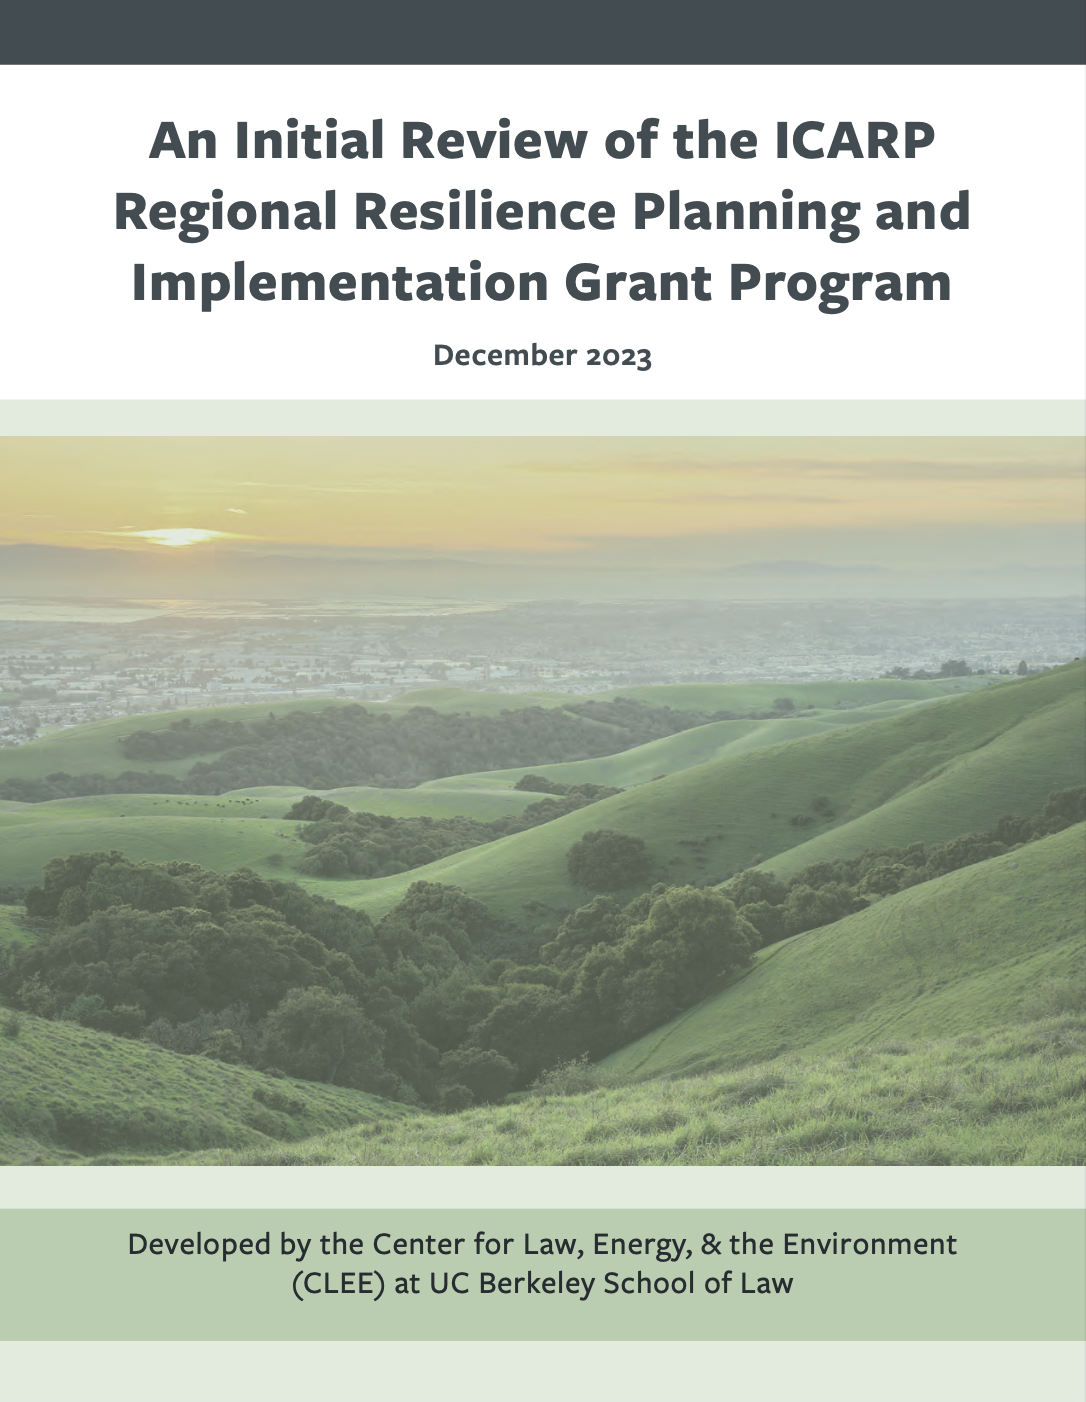 Report cover. Top reads, "An Initial Review of the ICARP Regional Resilience Planning and Implementation Grant Program,." Includes picture of rolling green hills.